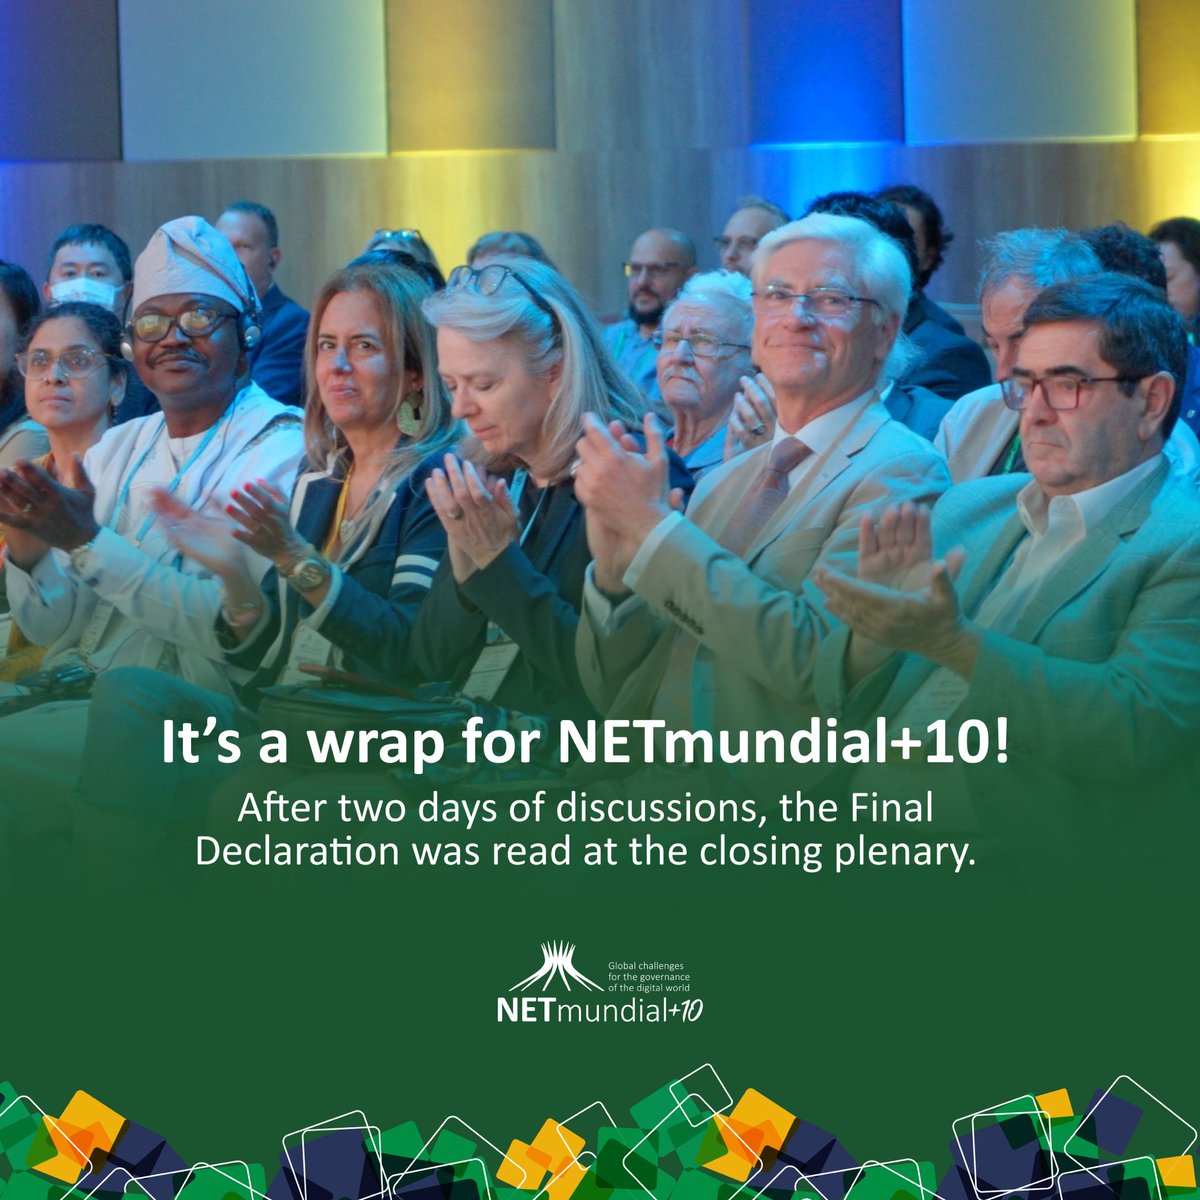 It’s a wrap for NETmundial+10! 

The Final Declaration, entitled NETmundial+10 Multistakeholder Statement: Strengthening Internet governance and digital policy processes, was read and will be publicly available soon.